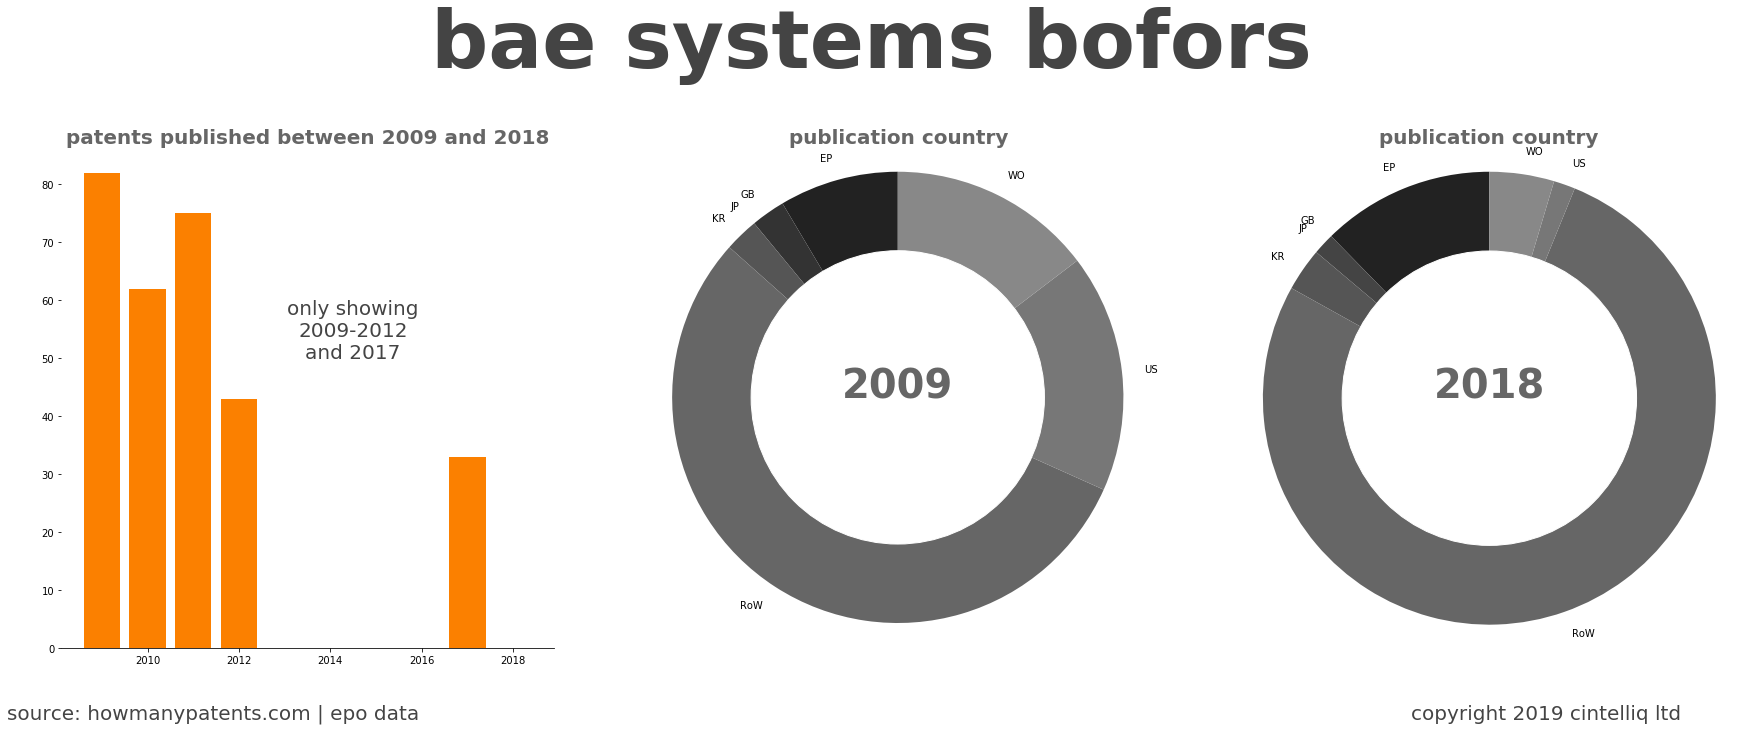 summary of patents for Bae Systems Bofors